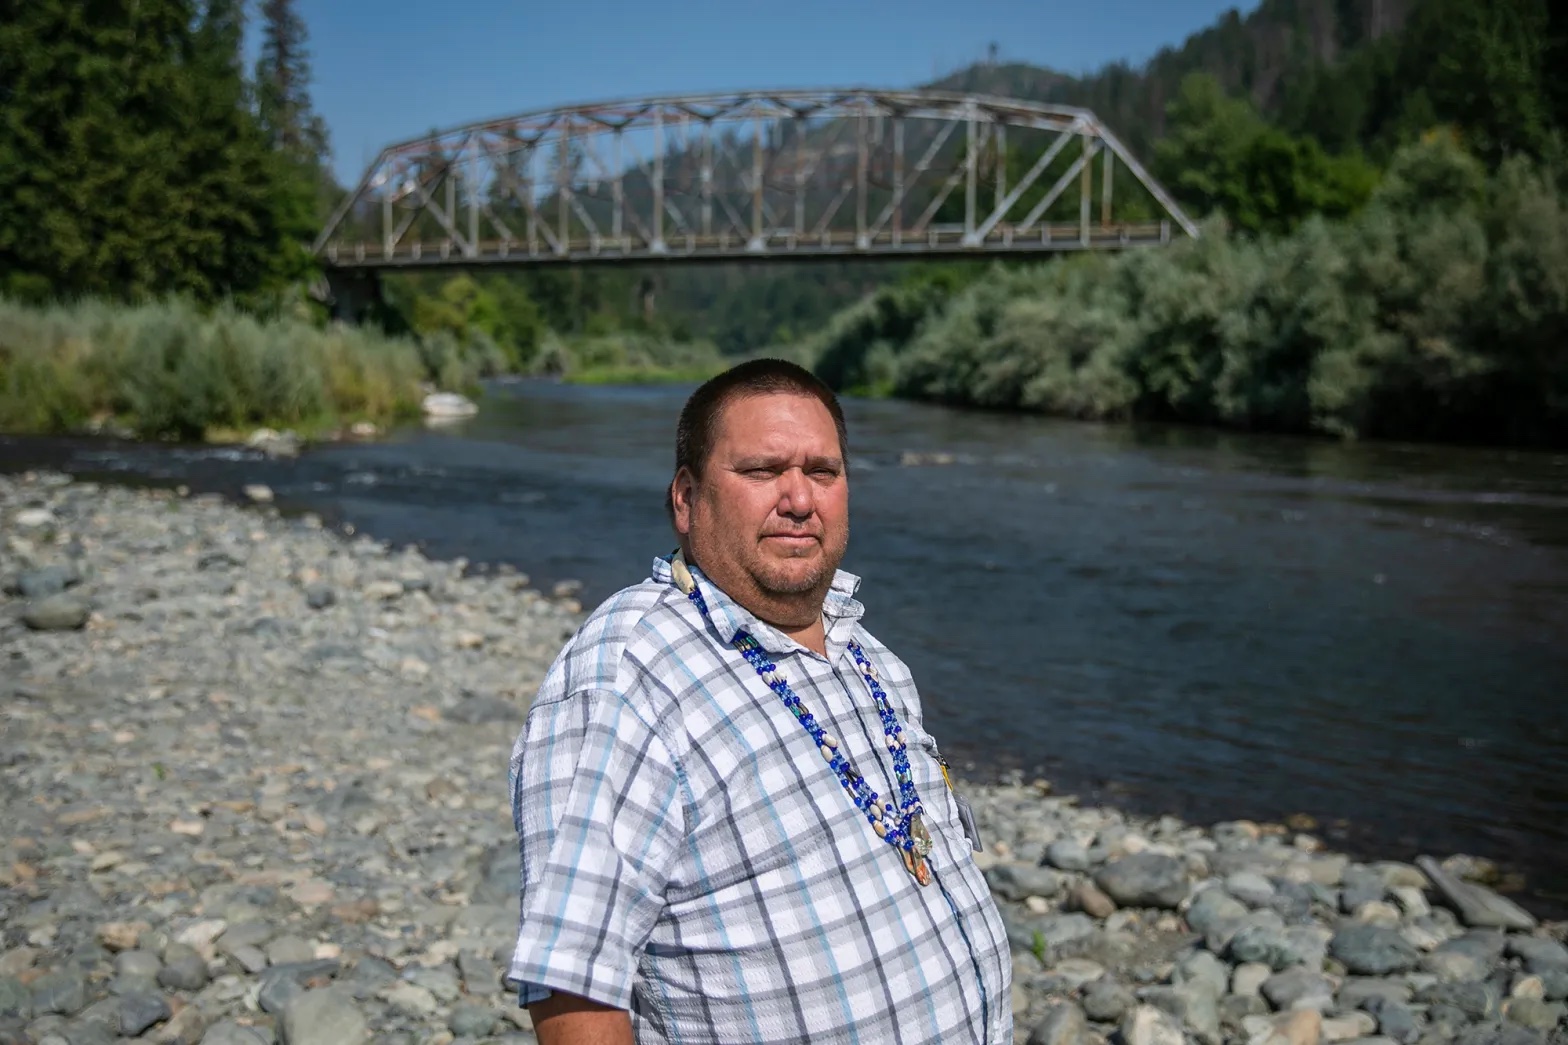 A larger Native man in a plaid button up shirt, with a long string of bright blue beads around his neck, stands in front of a river.